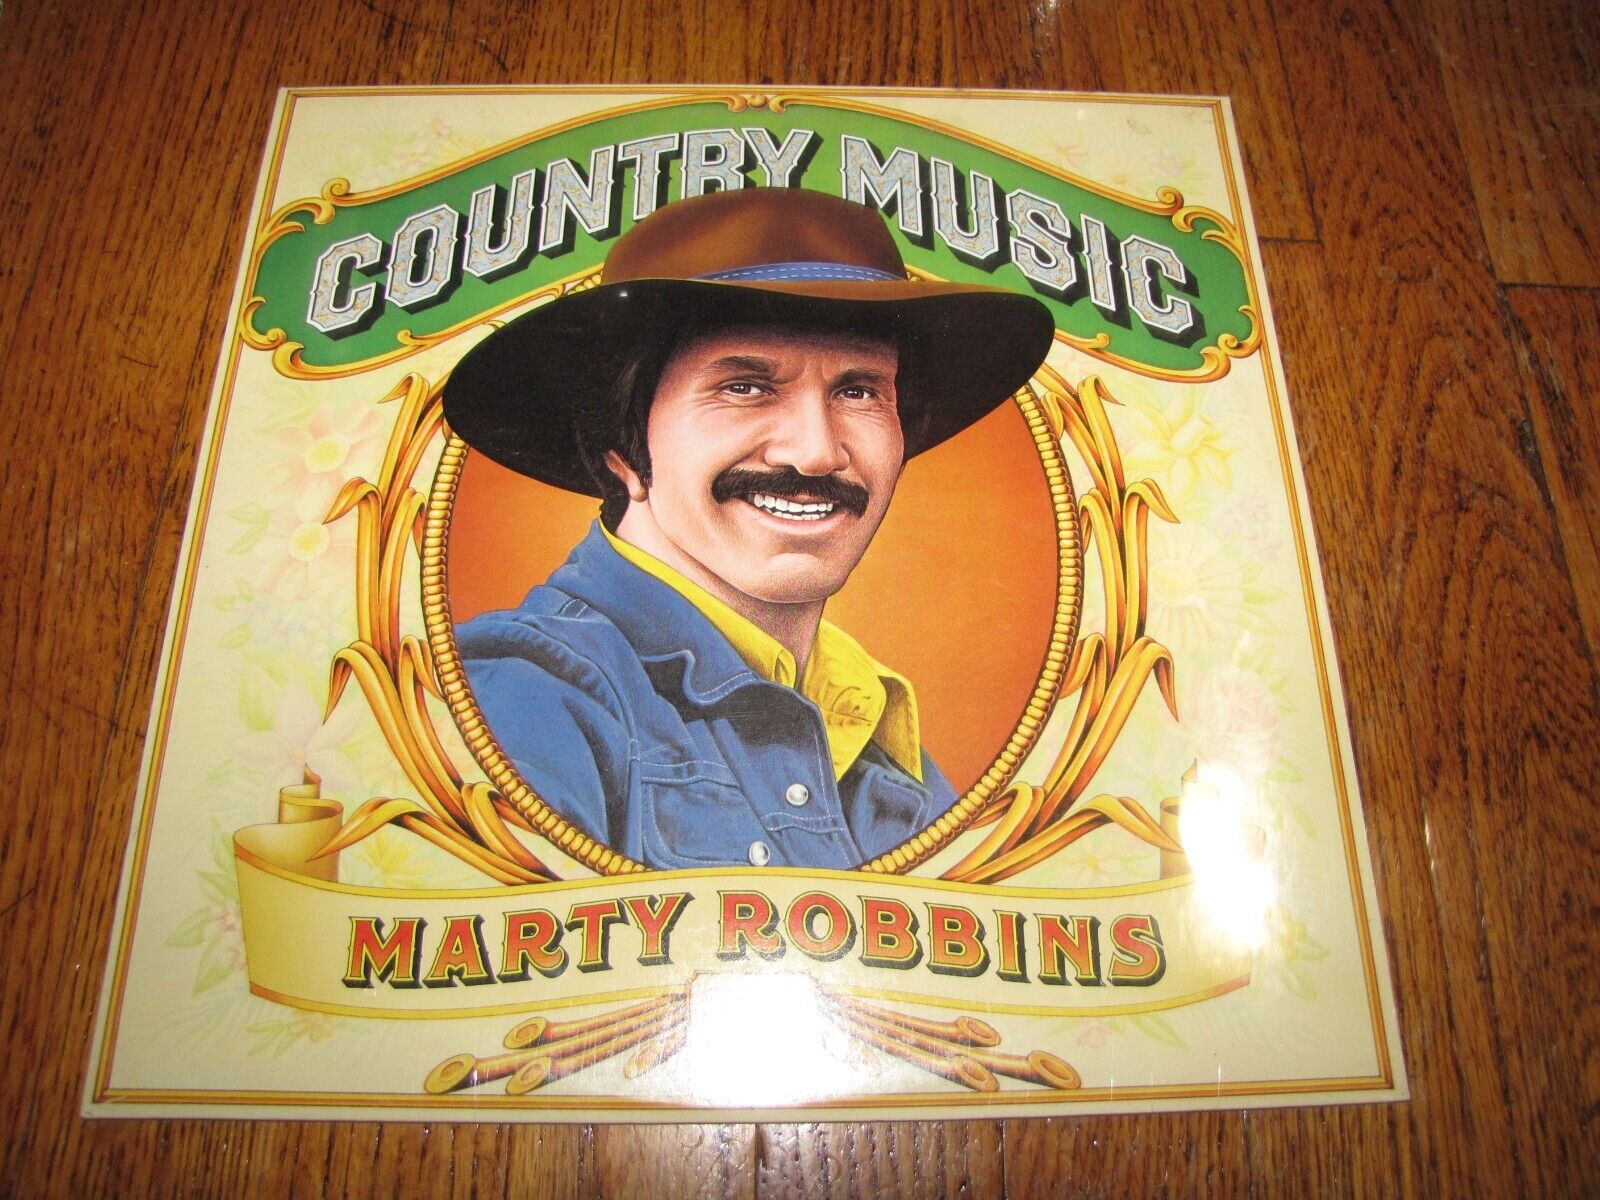 MARTY ROBBINS - COUNTRY MUSIC SERIES - TIME LIFE RECORDS SEALED LP